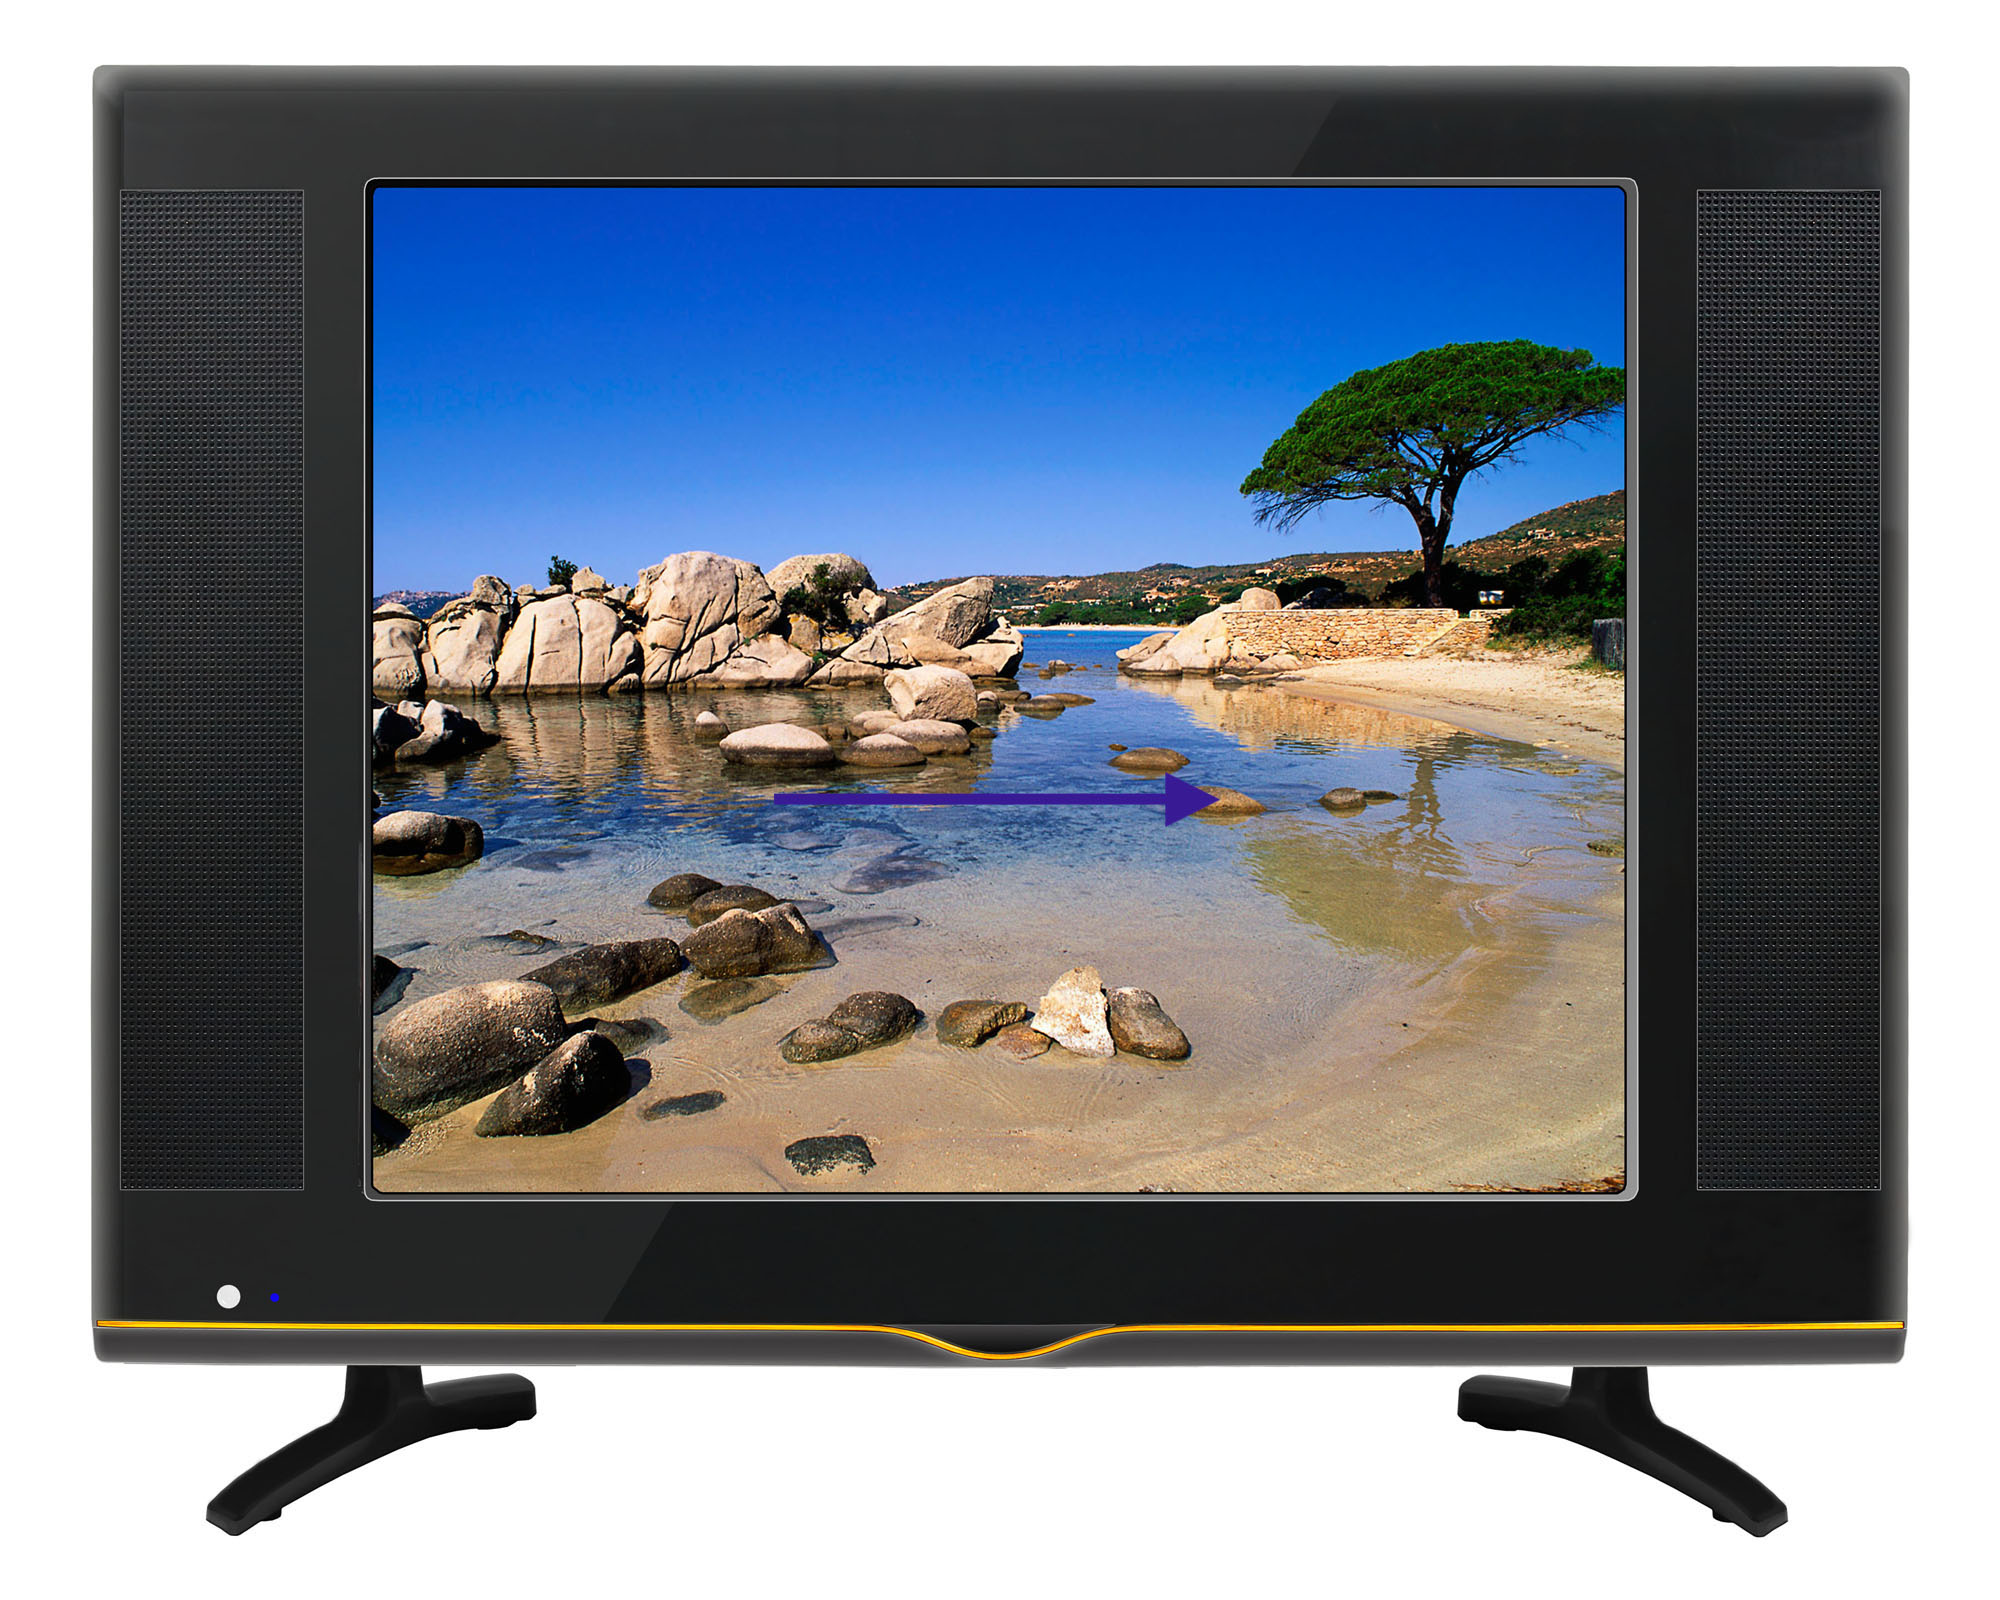 Guangzhou Dongpin Acdc Tvsolar Powered Tvdc 12 Volt Tv Dp 15 Inch